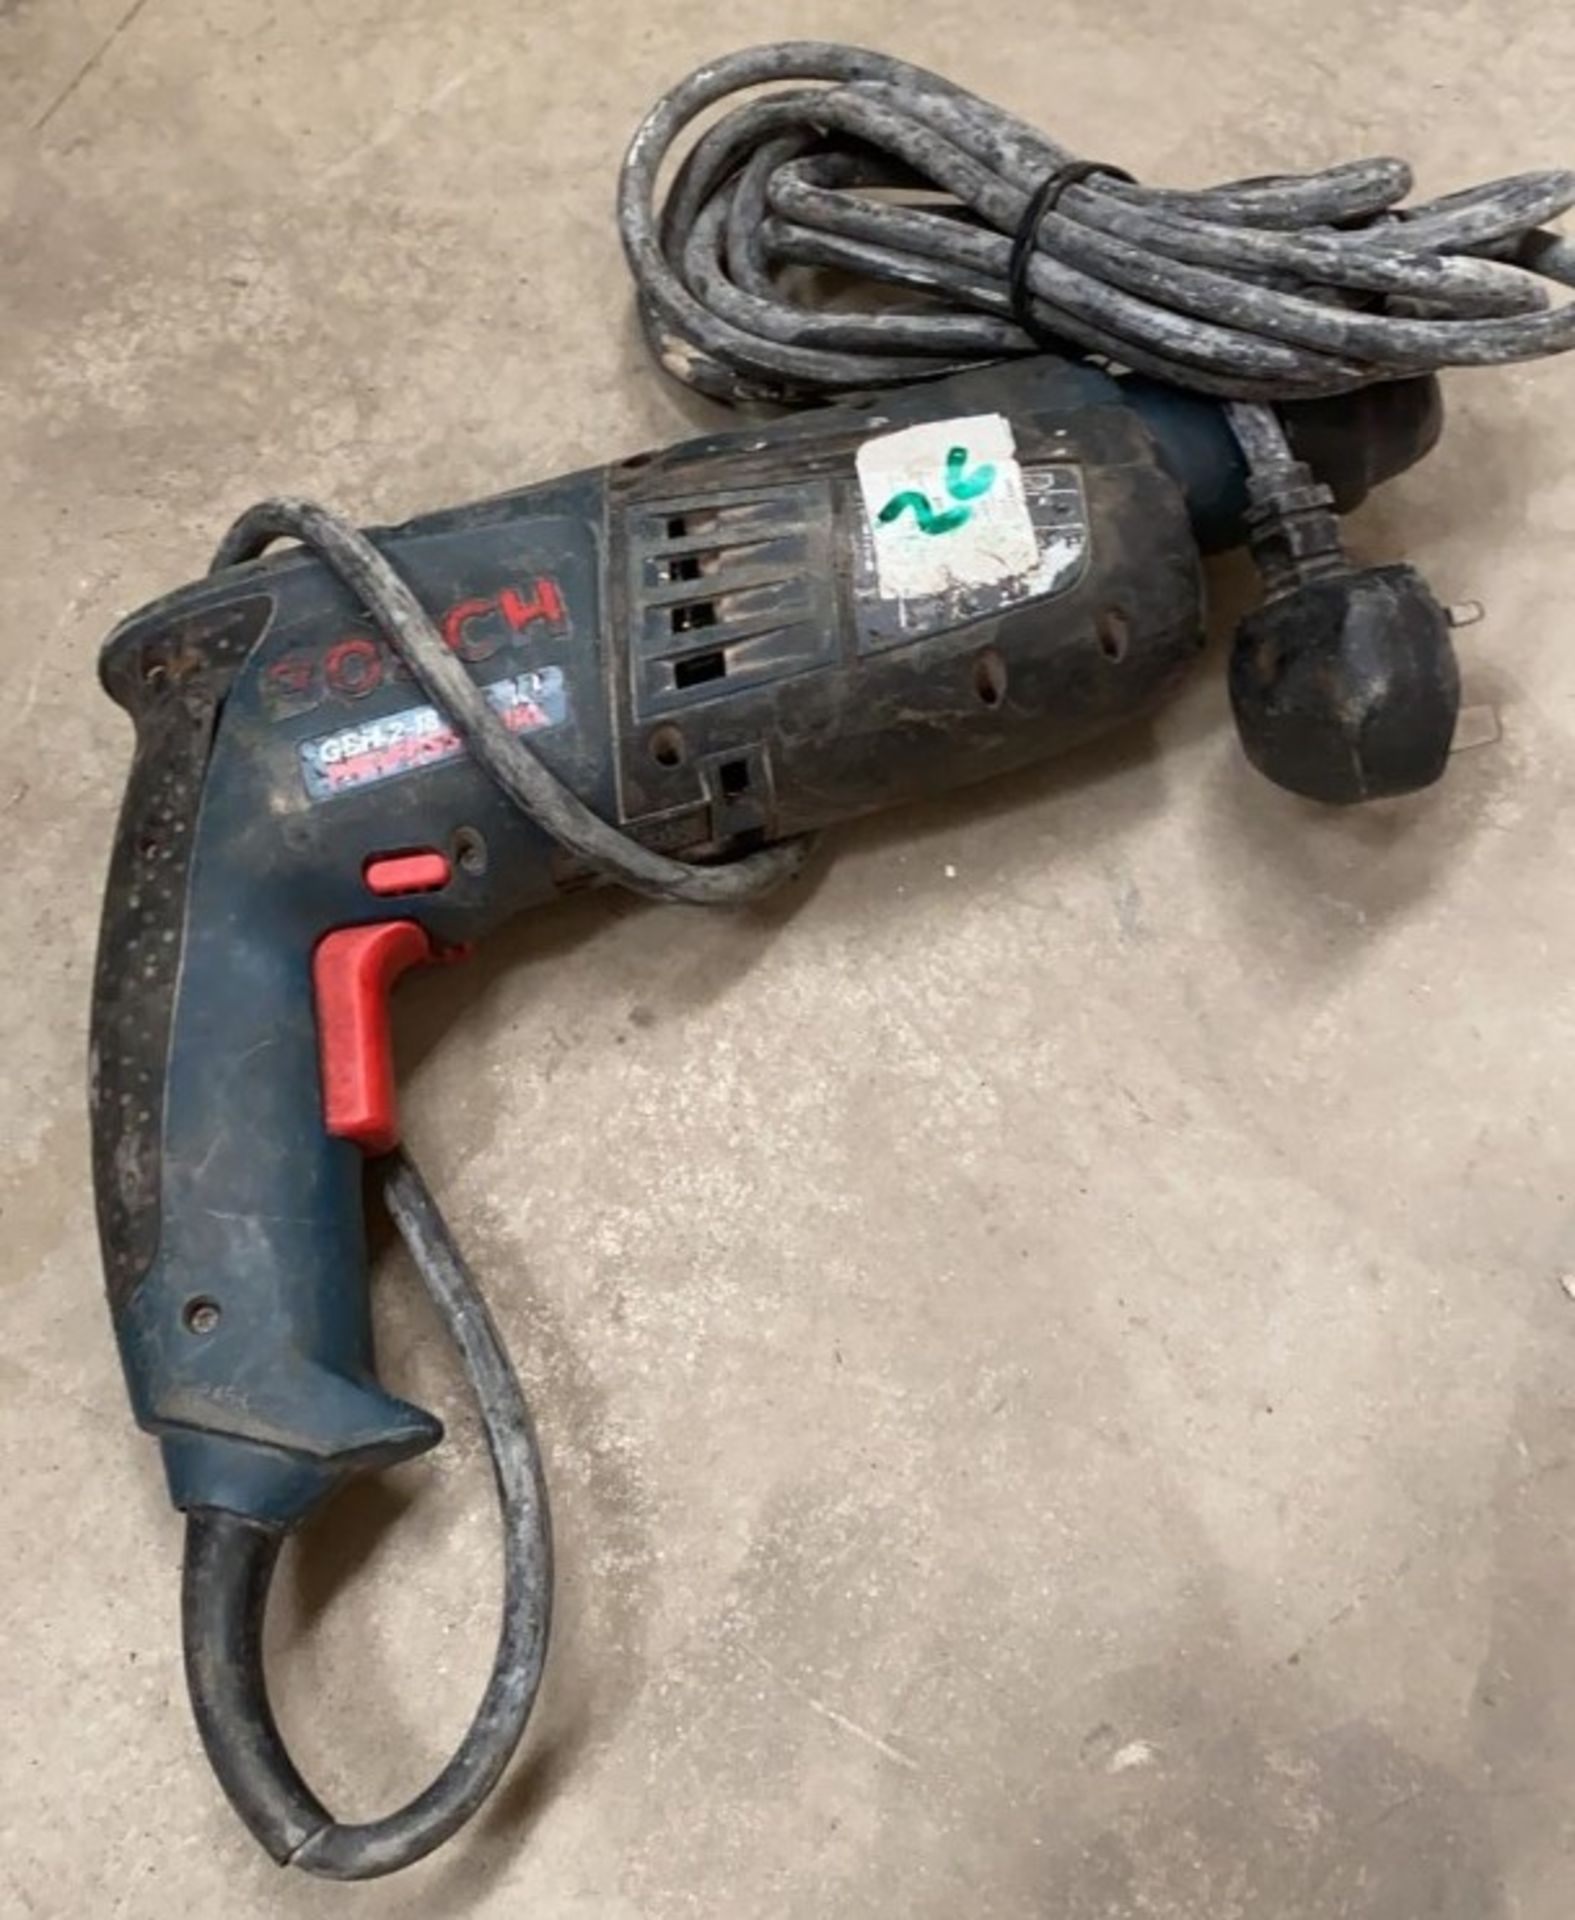 1 x Bosch Drill - Used, Recently Removed From A Working Site - CL505 - Ref: TL026 - Location: